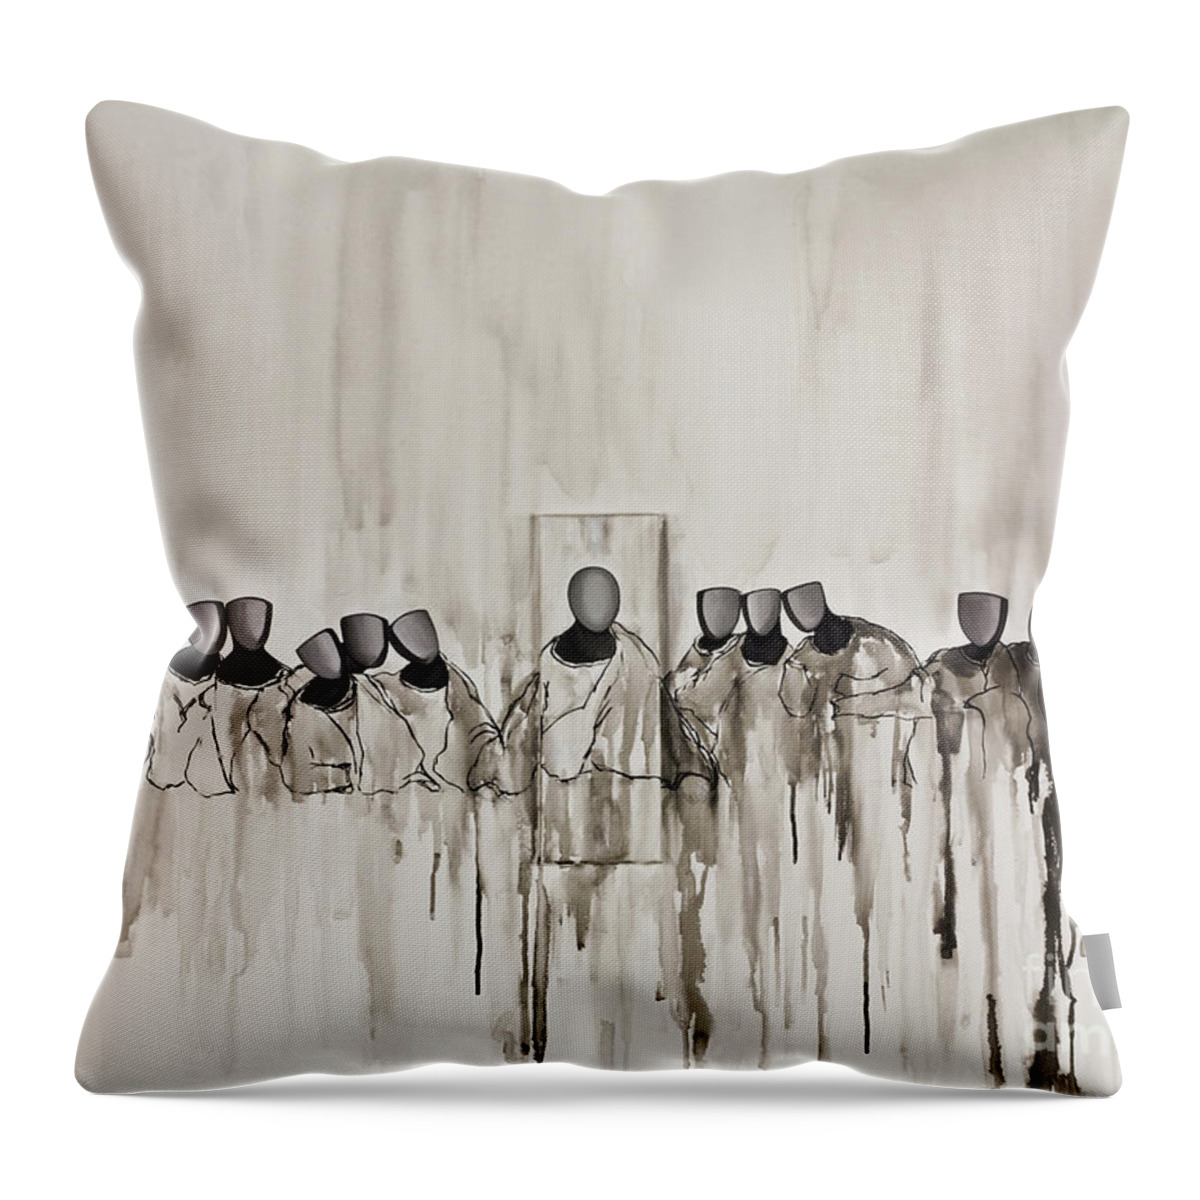 The Last Supper Painting Throw Pillow featuring the painting Last Supper by Fei A